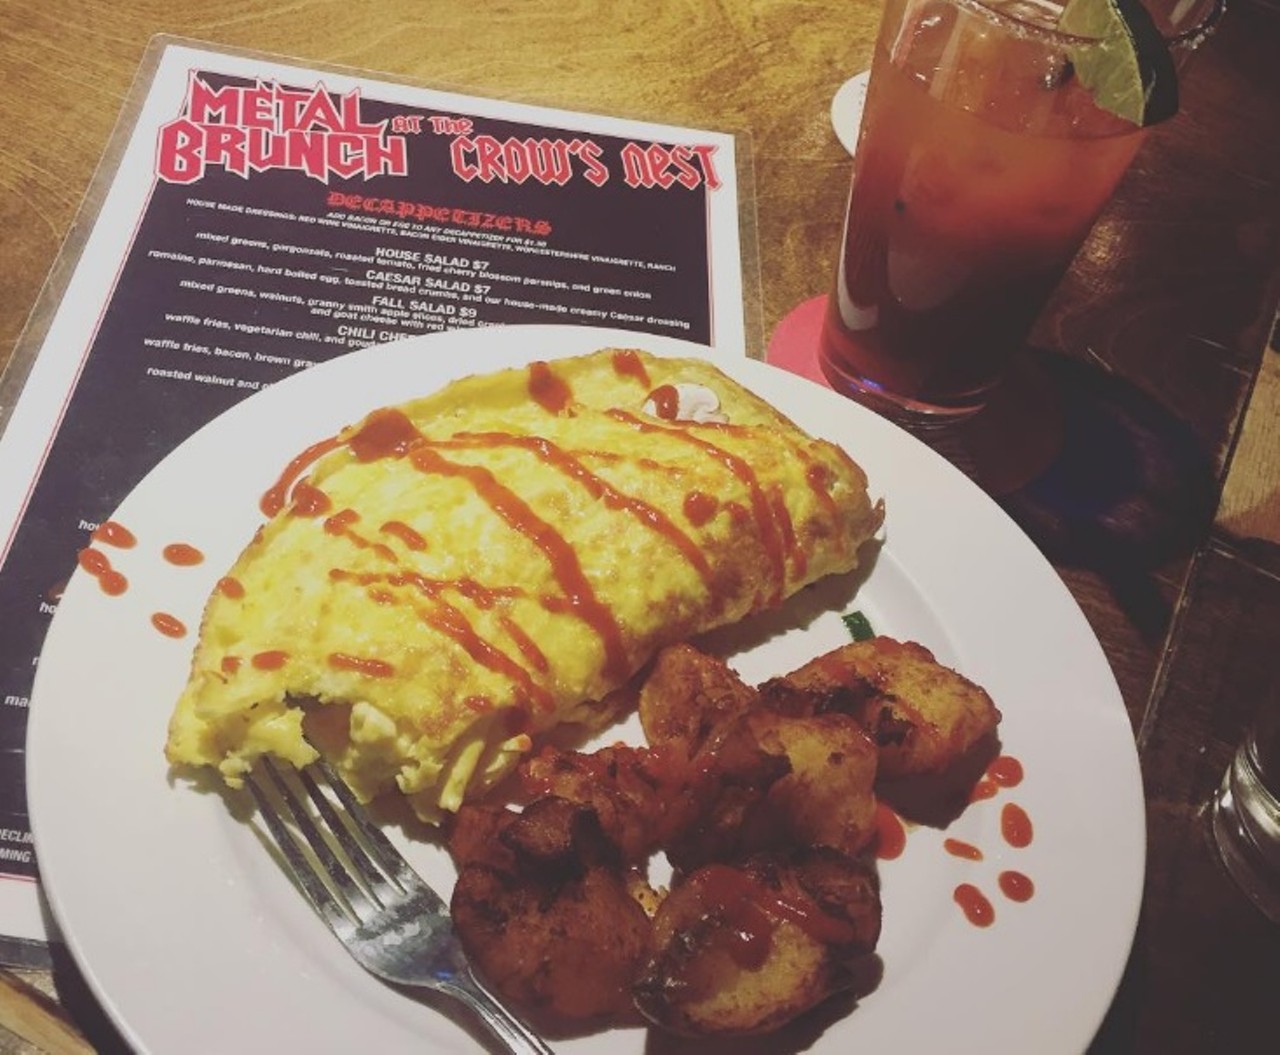 When You Want a Side of the Dark Lord With Your Omelet: Crow&#146;s Nest
Jazz brunch? So 1950. Try a metal brunch for a darker way to dine. Serving up everything from Decappetizers to Mercyful Plates, Judas Feasts to Geno-sides, the Crow&#146;s Nest (7336 Manchester Road, Maplewood; 314-781-0989) delivers a heaping helping of Beelzebub with its brunch fare. Each Saturday from 11 a.m. to 3 p.m. and Sundays from 10 a.m. to 3 p.m., the Maplewood eatery&#146;s &#147;Metal Brunch&#148; includes a sprawling menu of delicious food and a soundtrack that would satisfy even the most discerning headbanger. On Saturdays Dr. Dan the Pancake Man is on hand to whip up his culinary creations &#151; ask him to make you a pancake that looks like the devil, then worship it. Photo courtesy of Instagram / cort_gabel.